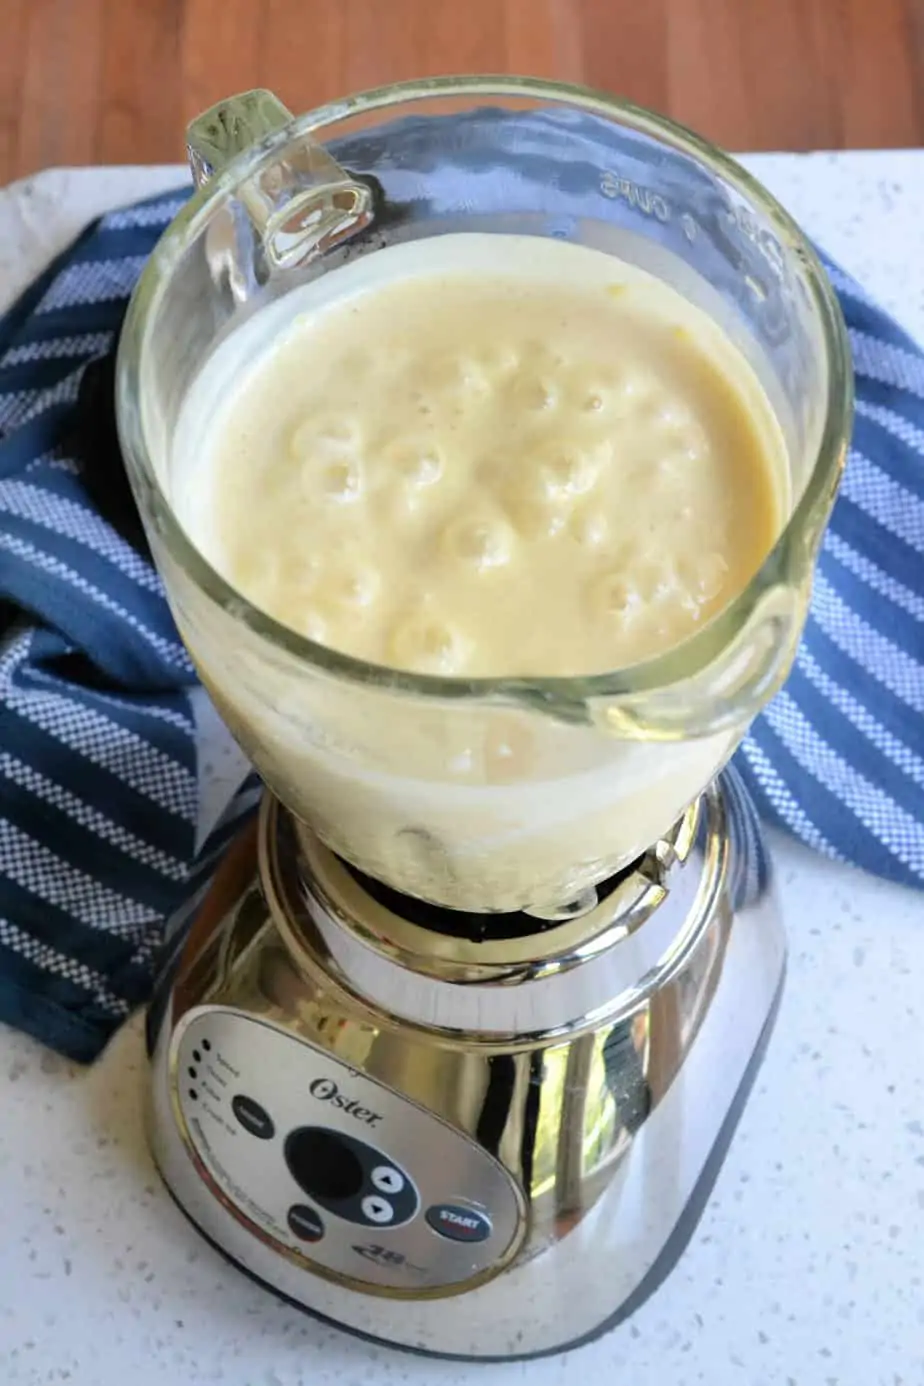 Simply put the mango, yogurt, milk, honey, and cardamom or cinnamon in a blender.  Then blend until smooth.